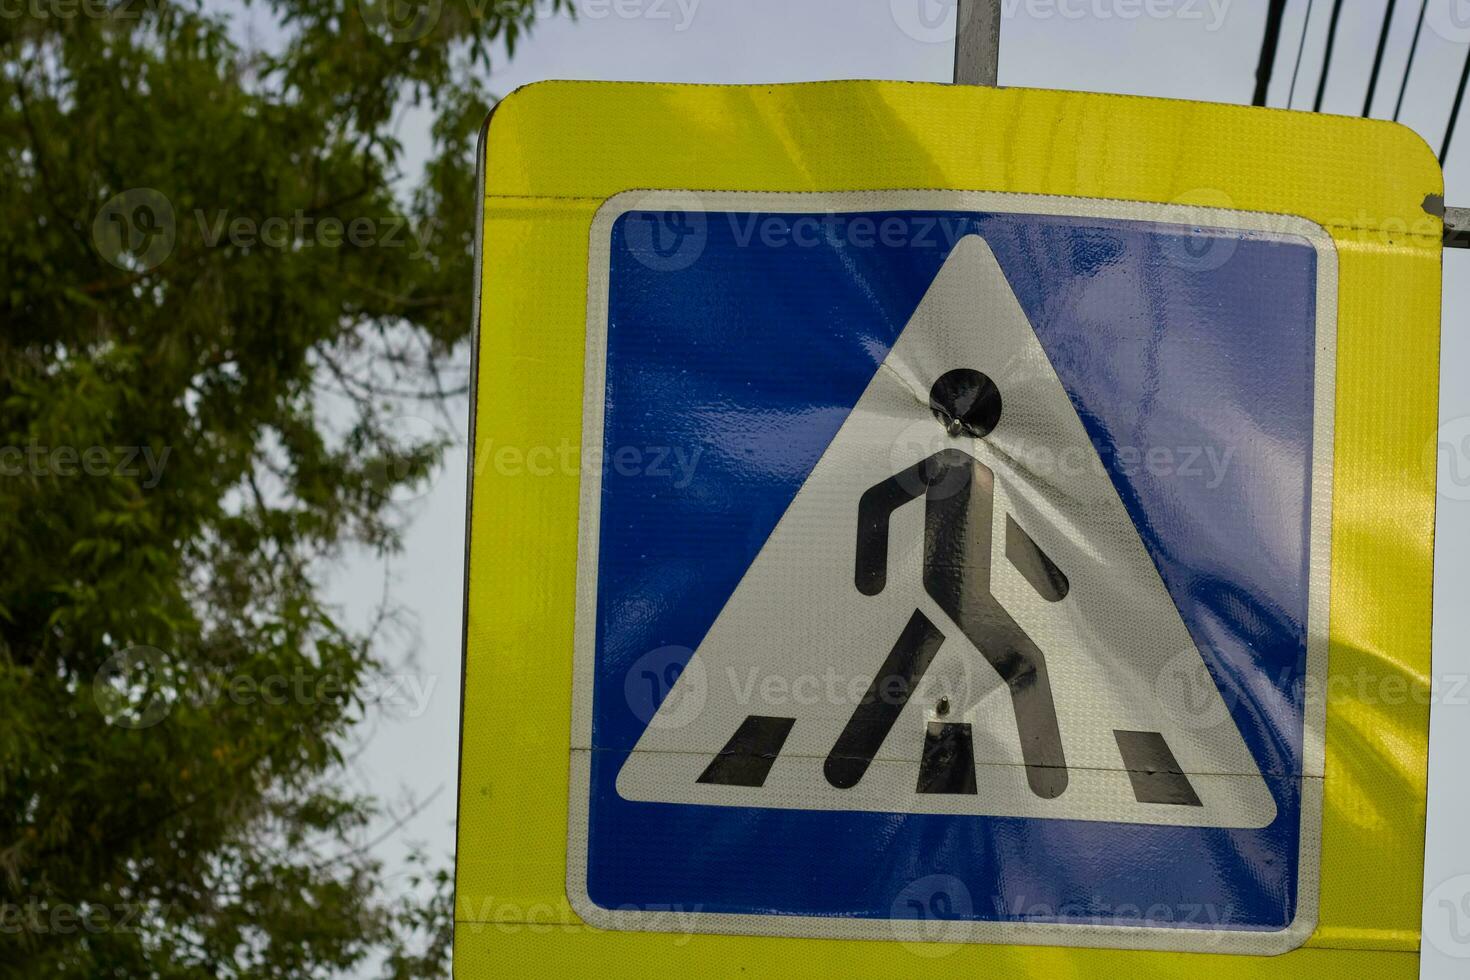 Photo pedestrian crossing sign damaged and dented